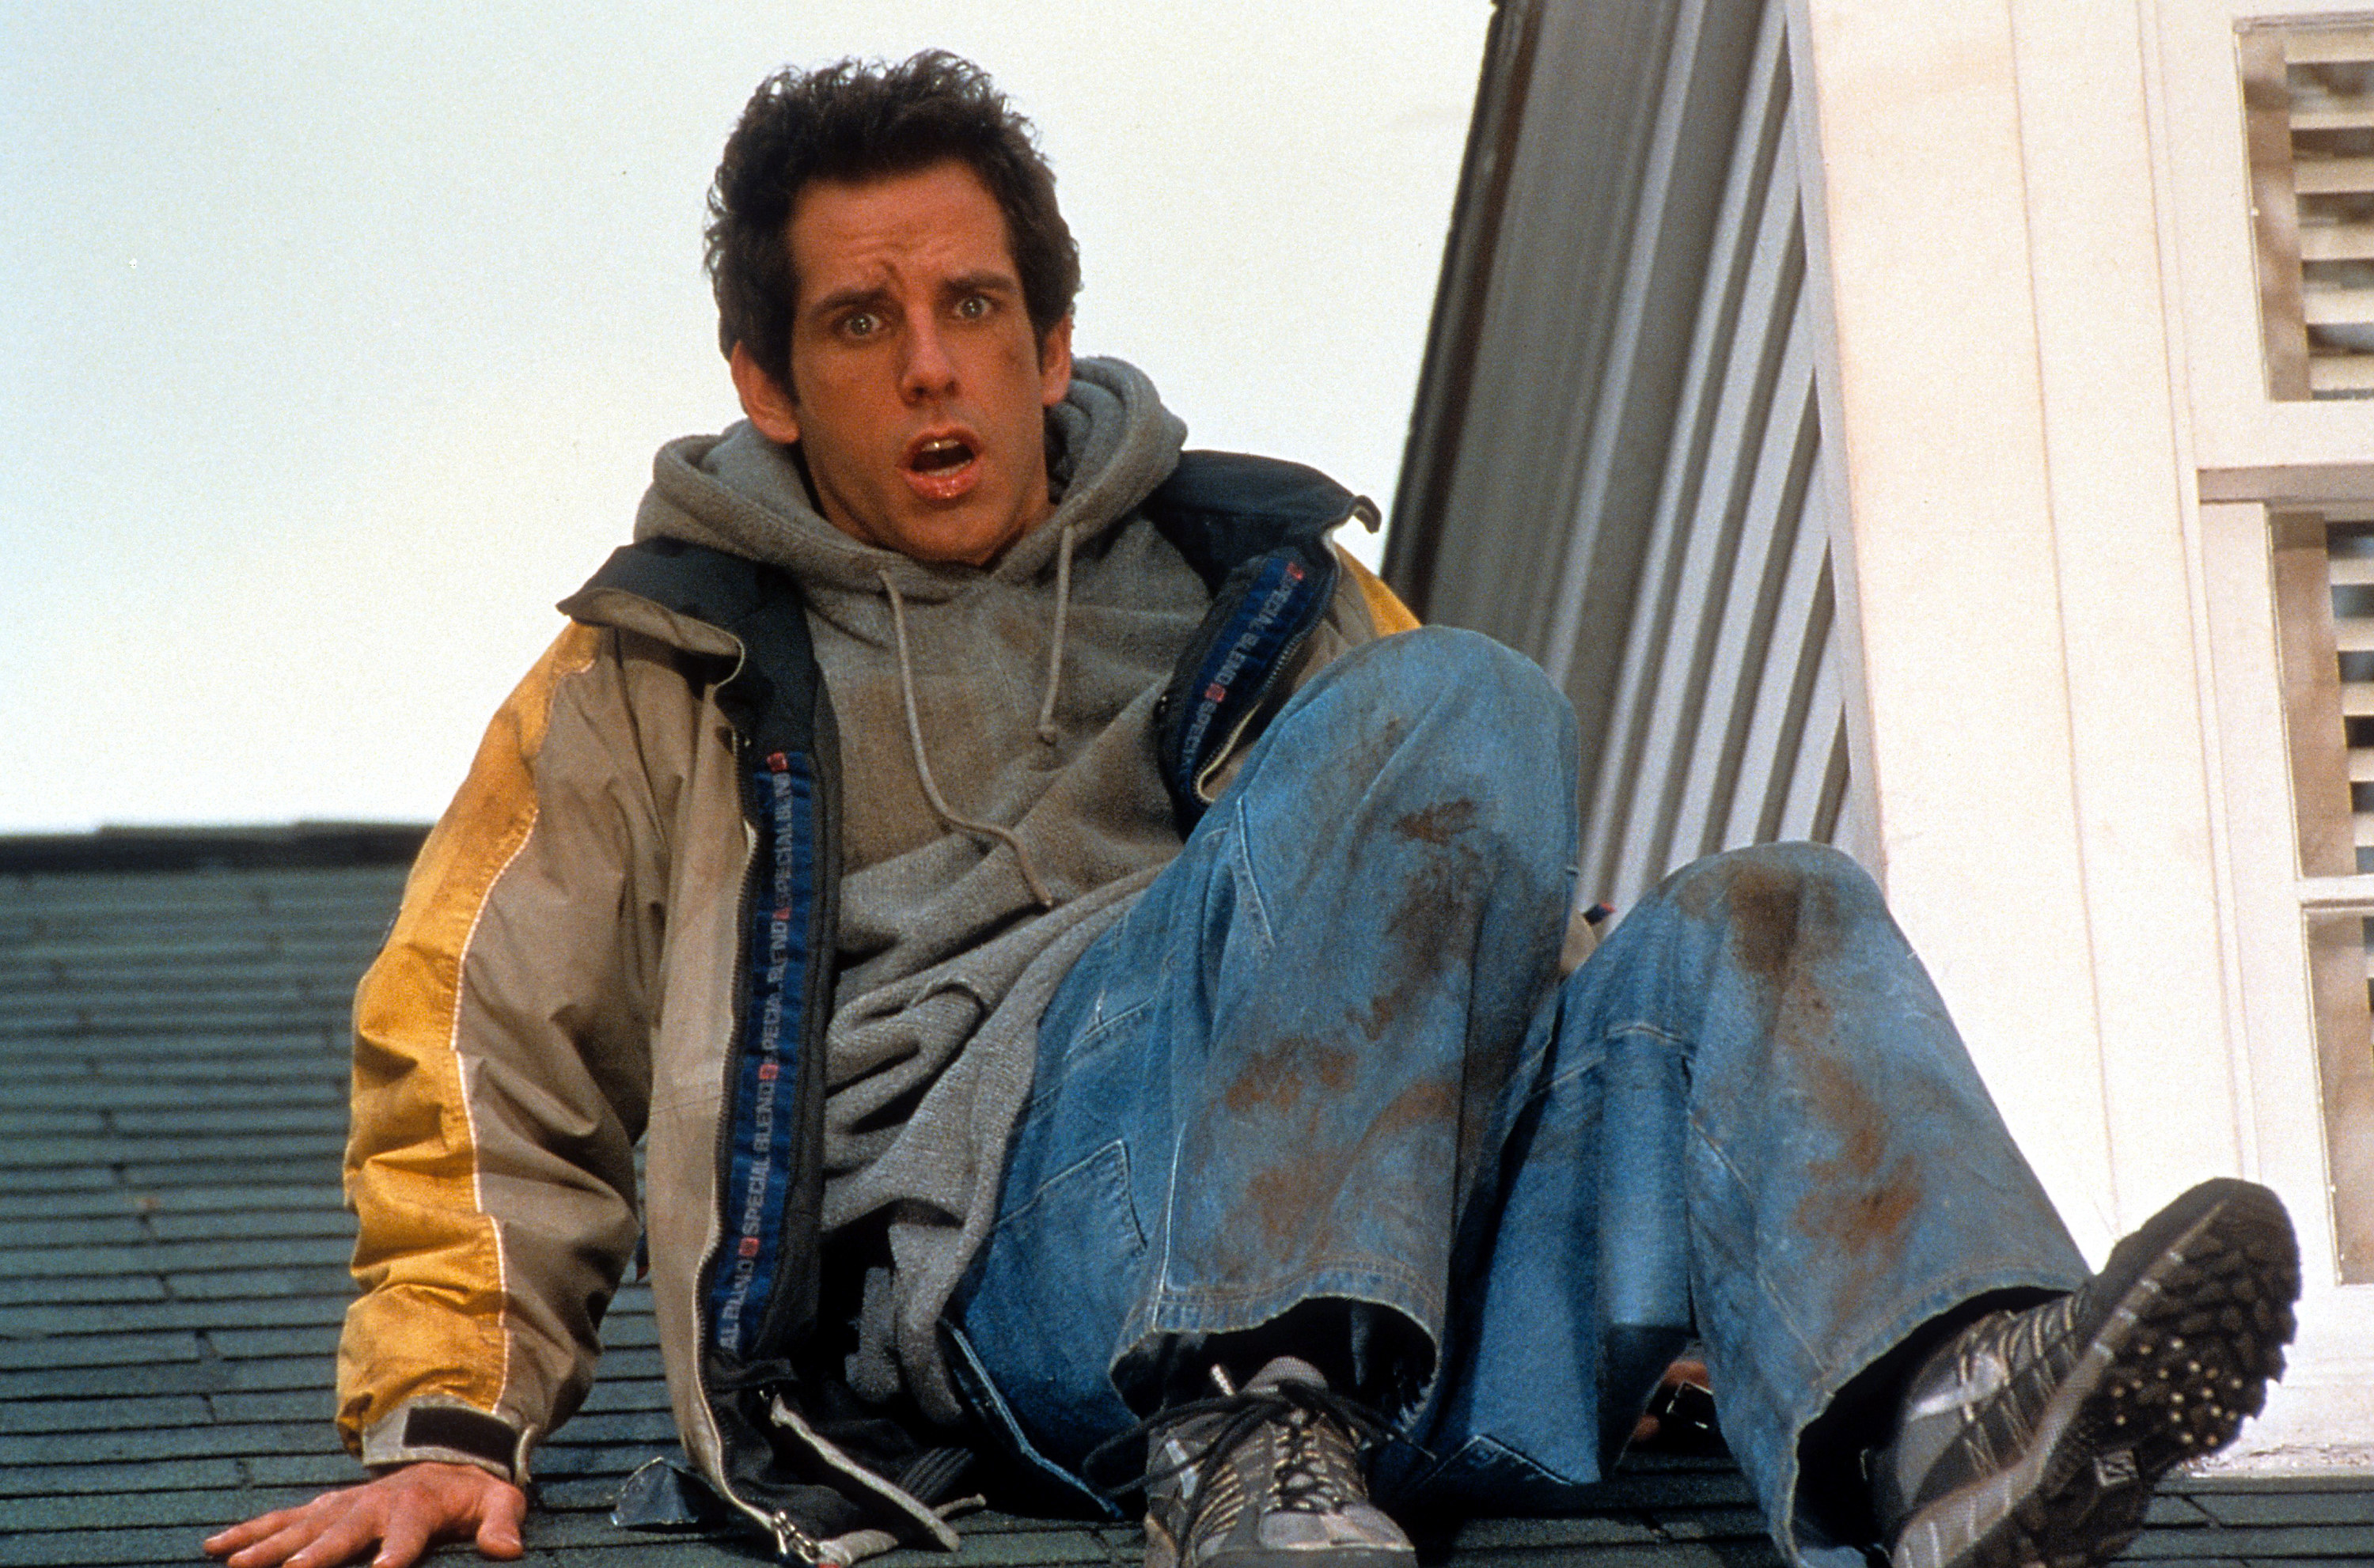 A dirtied Ben Stiller sitting on top of roof in a scene from the film &#x27;Meet The Parents&#x27;, 2000